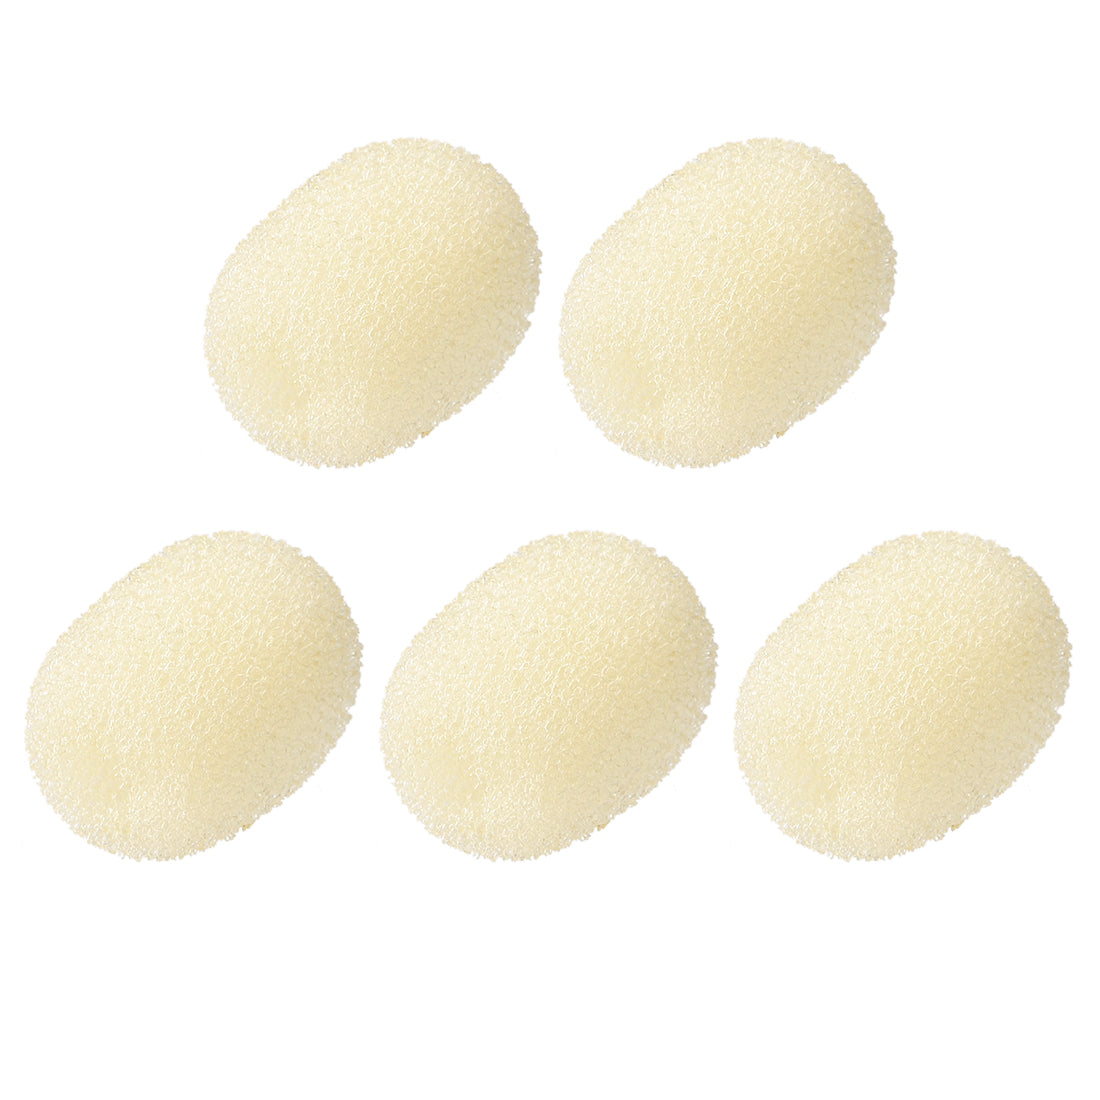 uxcell Uxcell 5PCS Foam Mic Cover Headset Microphone Windscreen Shield Protection 14.5mm Length for Headset Lapel Lavalier